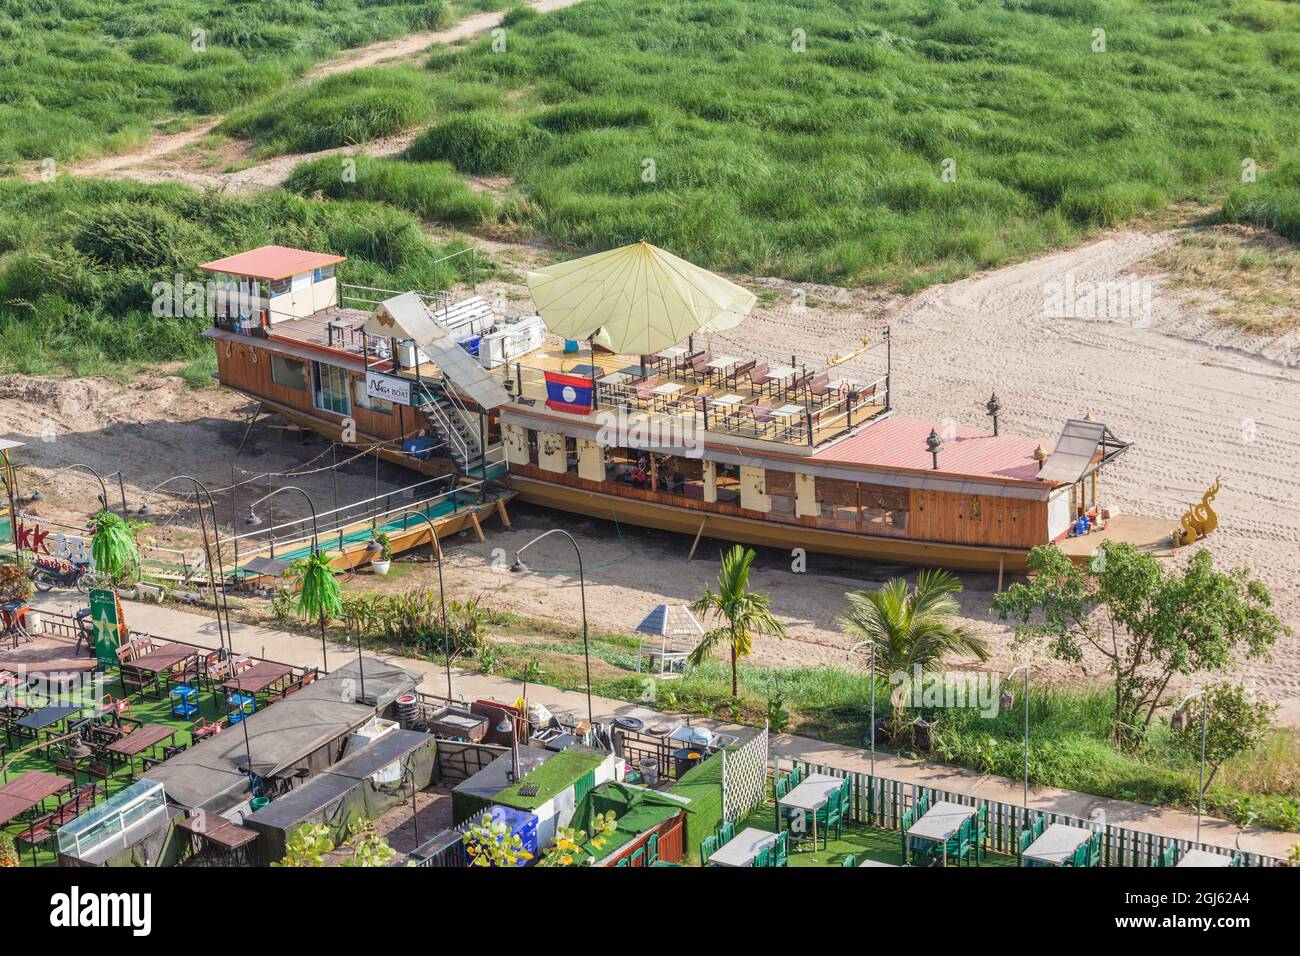 Laos, Vientiane. High angle view of Mekong riverfront restaurant. Stock Photo